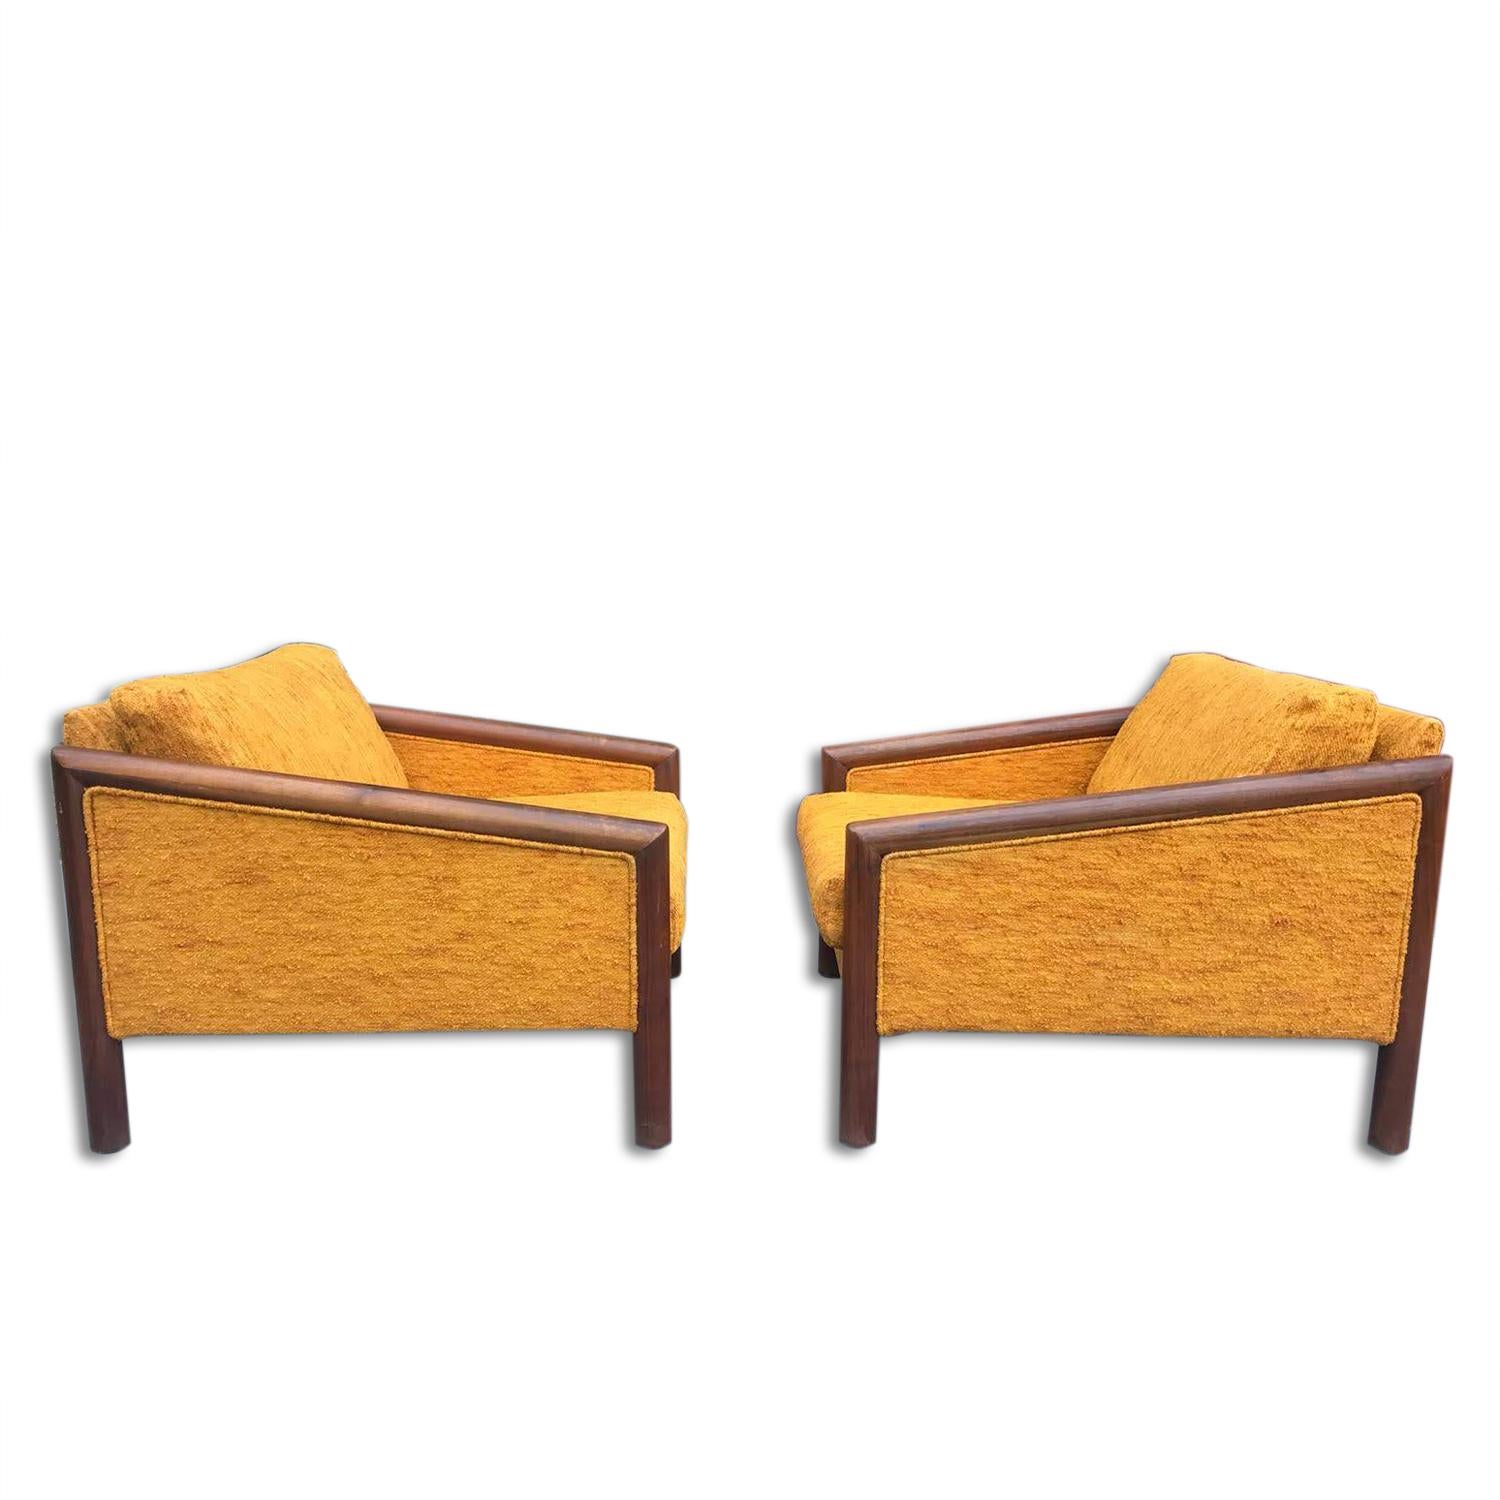 Pair of Adrian Pearsall Armchairs for Craft Associates, 1960s In Good Condition In Prague 8, CZ